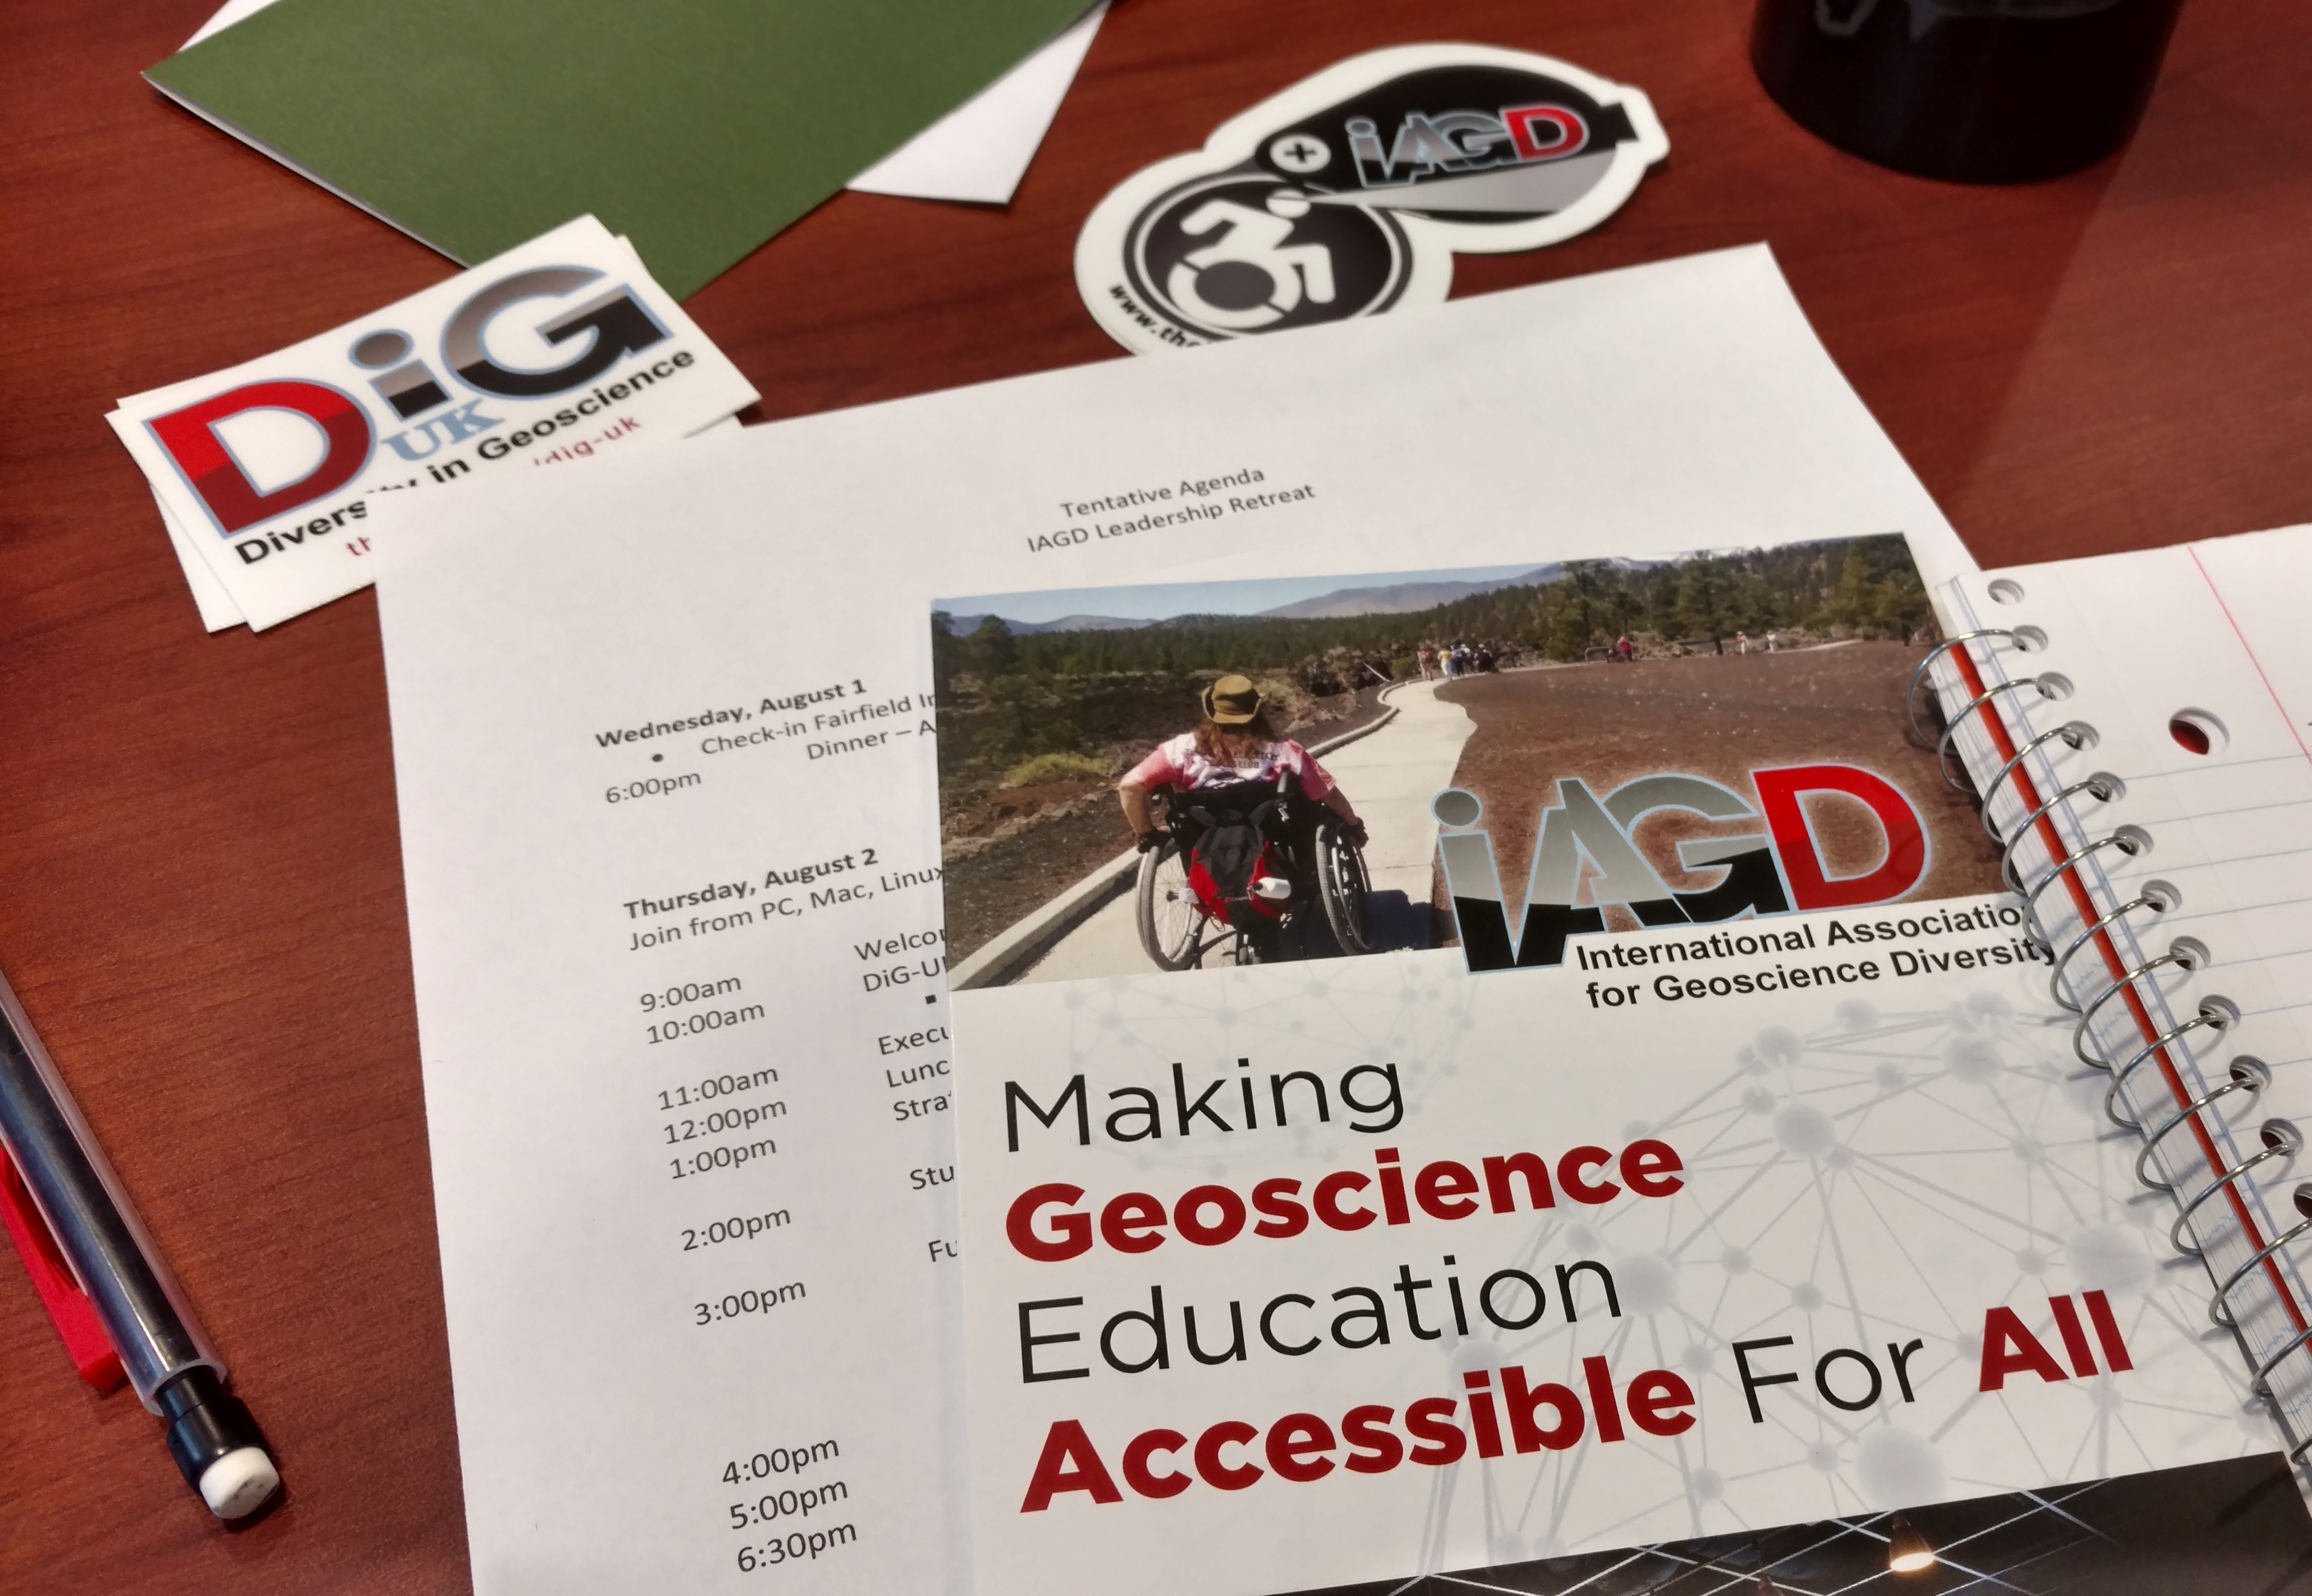 IAGD brochures, stickers, and an agenda from a 2019 leadership retreat.